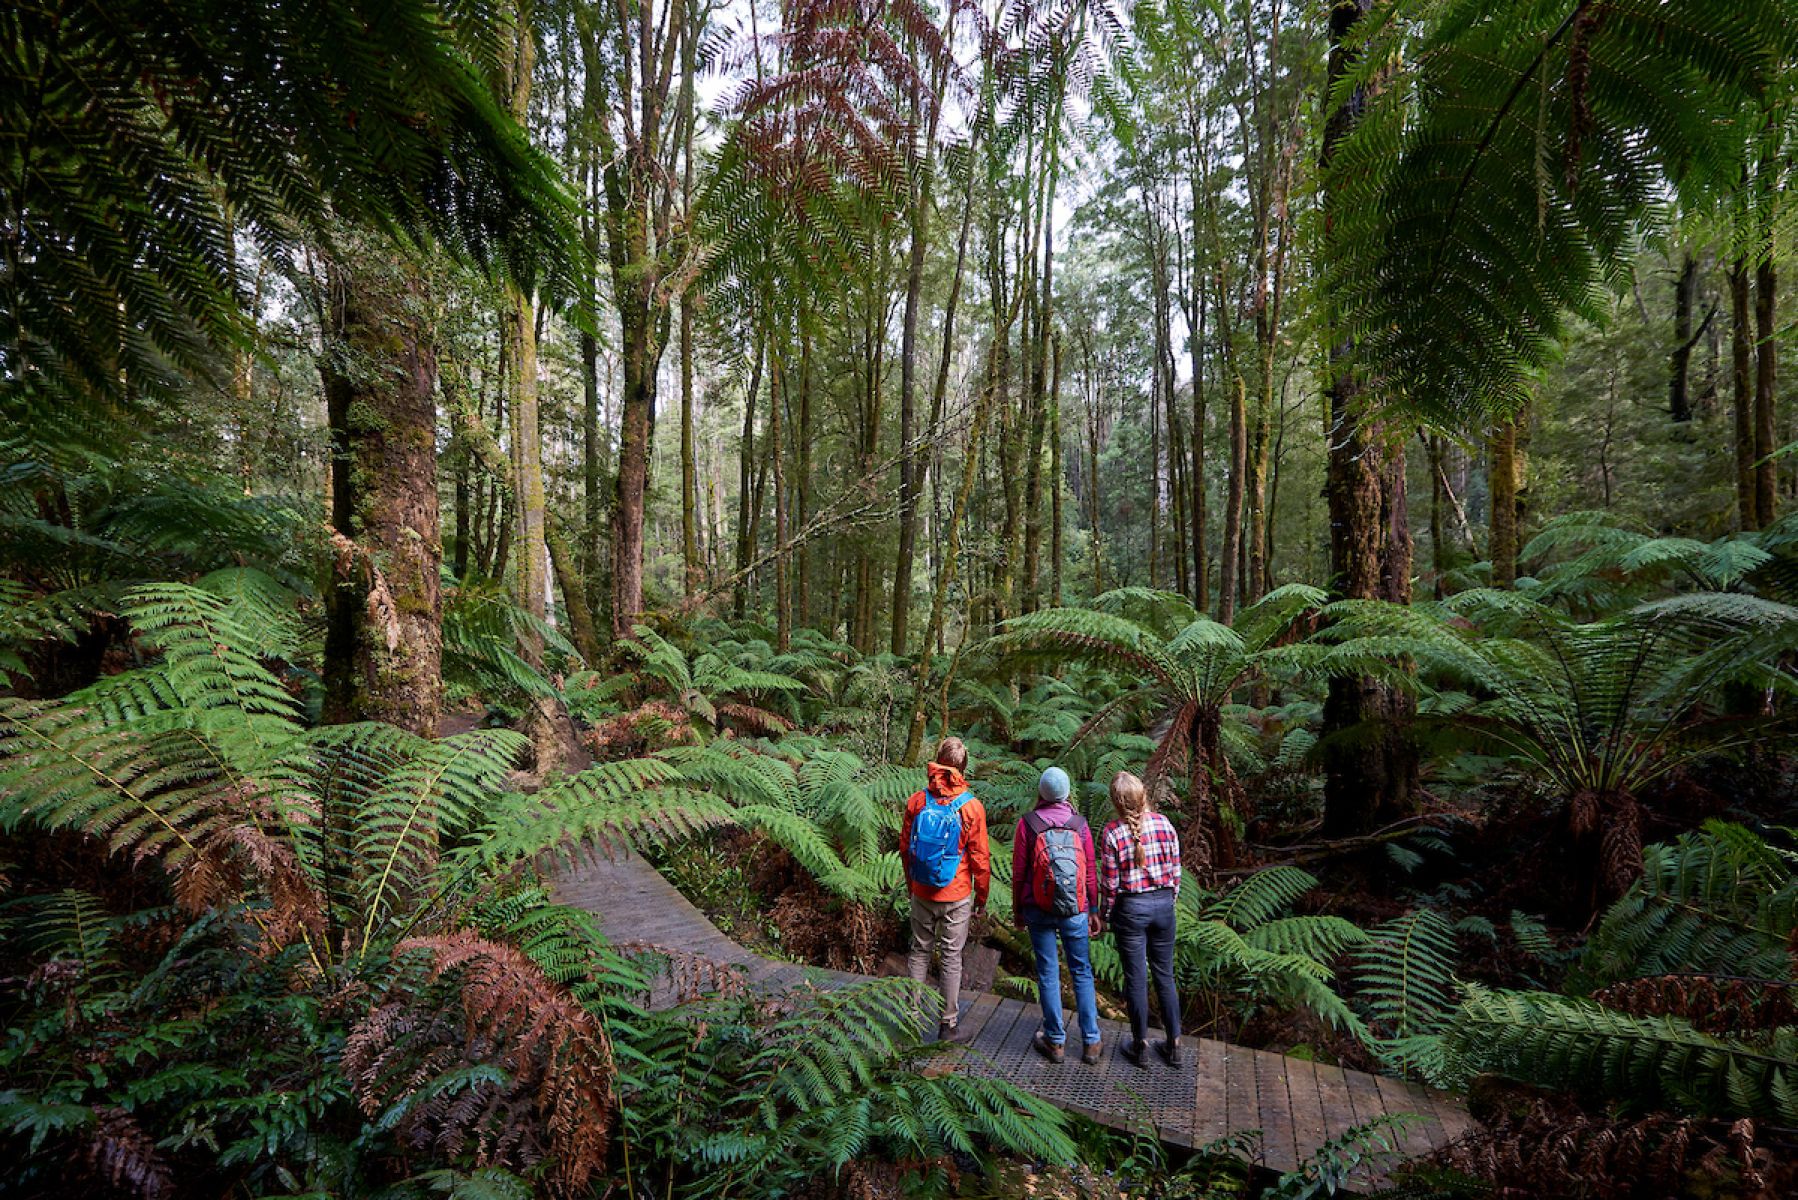 Three people stop on a wooden walkway to look at the view of surrounding ferns